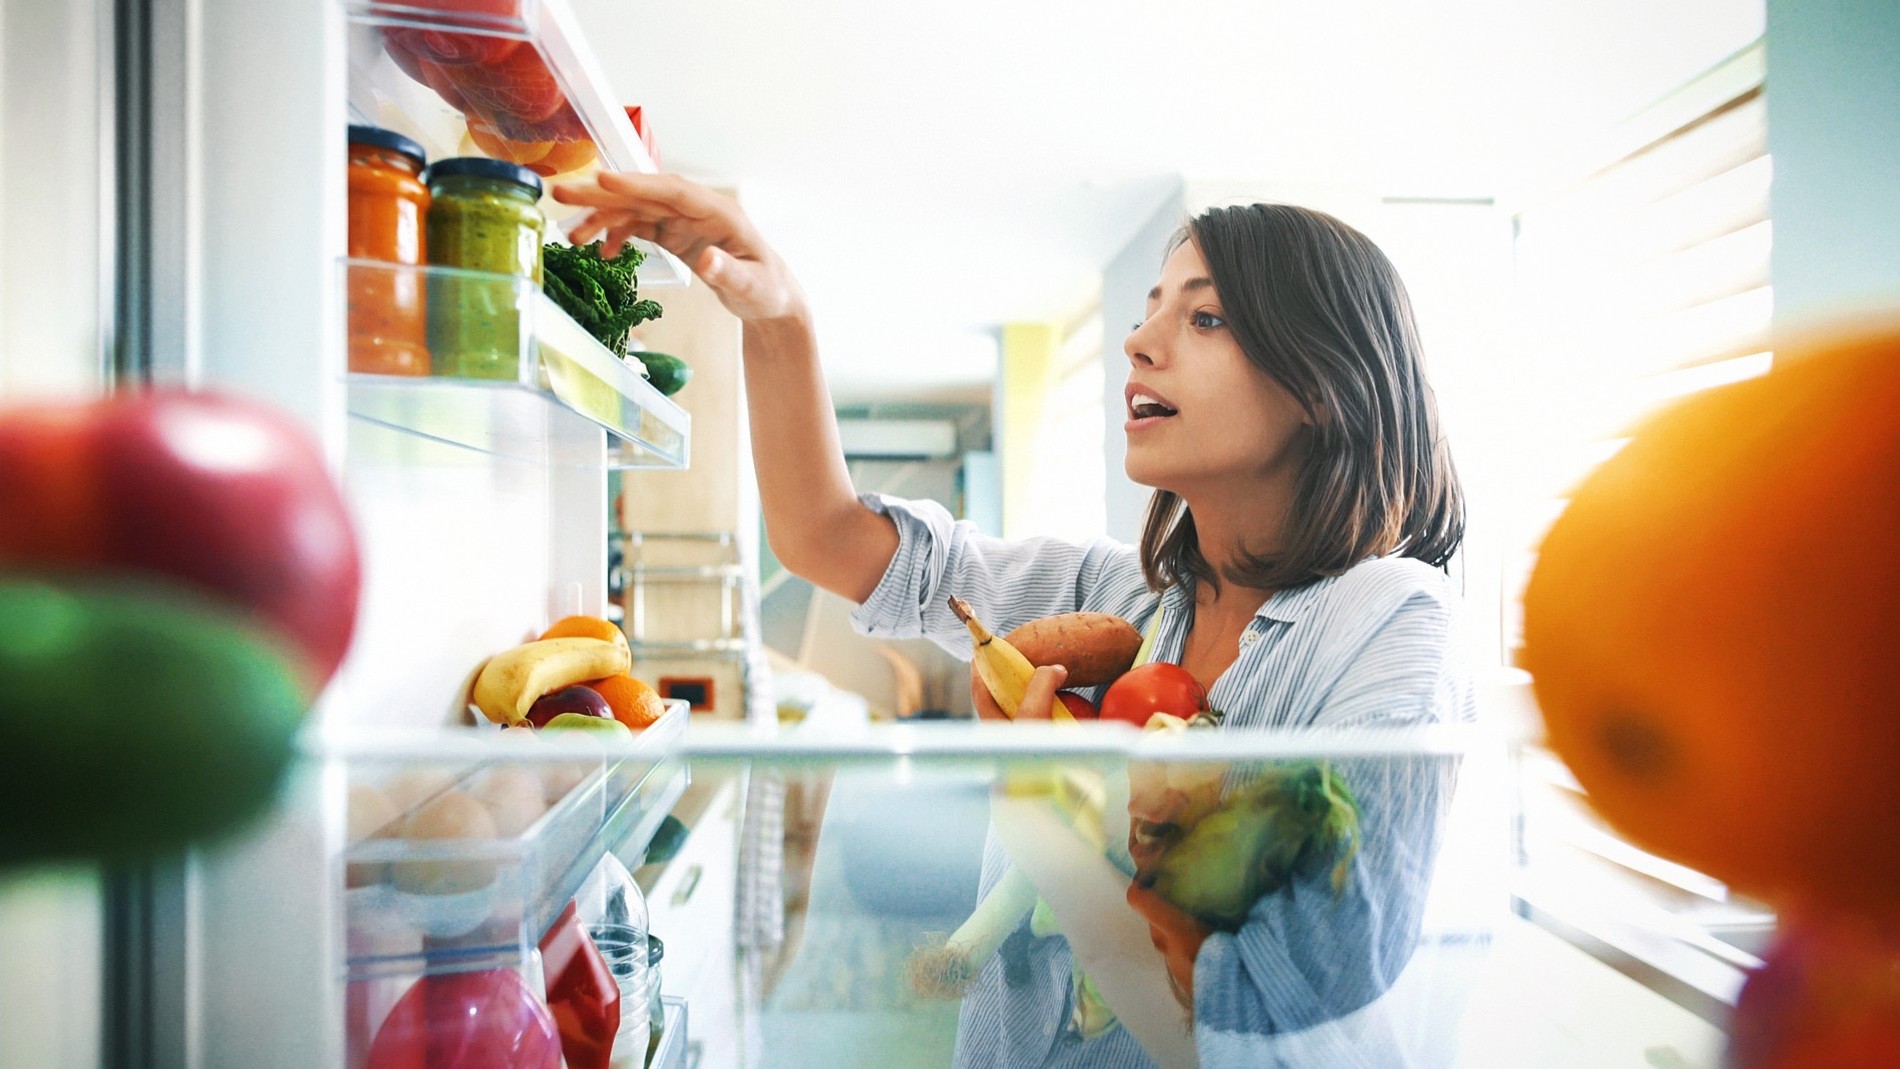 Put Fruit in the Refrigerator Without Washing and Grocery Shopping for Your Health